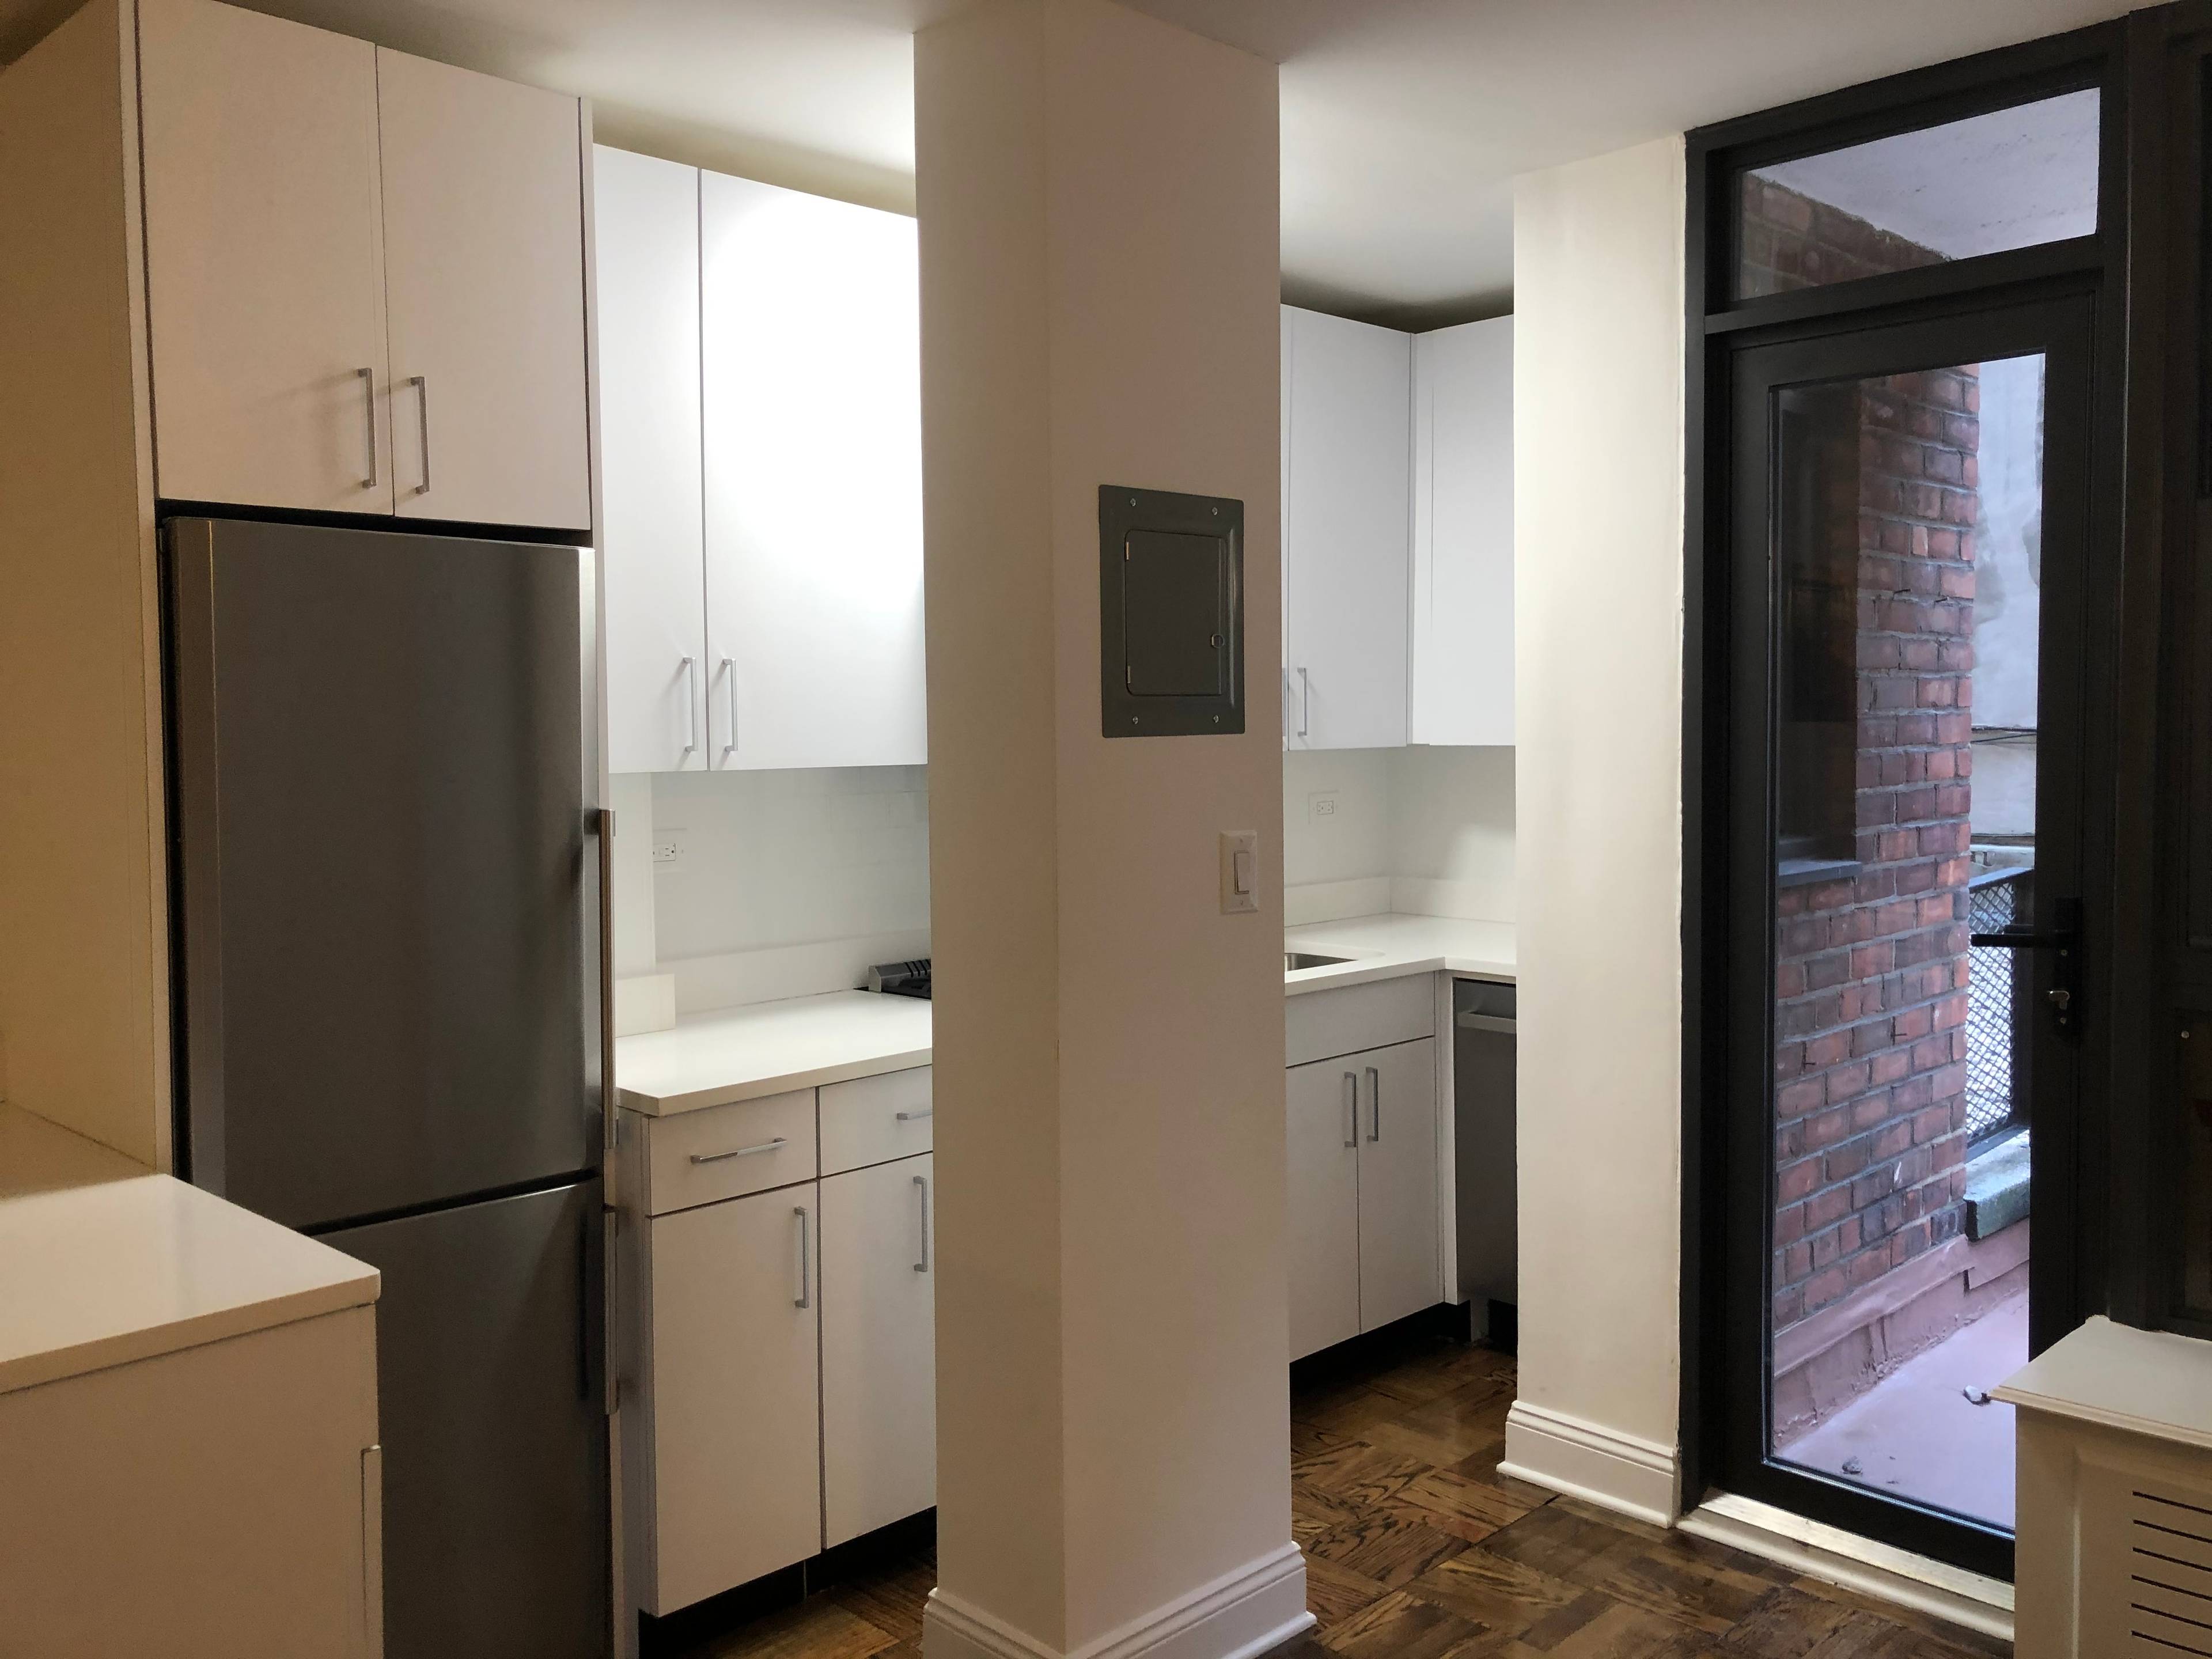 Renovated STUDIO in the heart of Midtown East + No Fee + Balcony with City Views + Great Price!